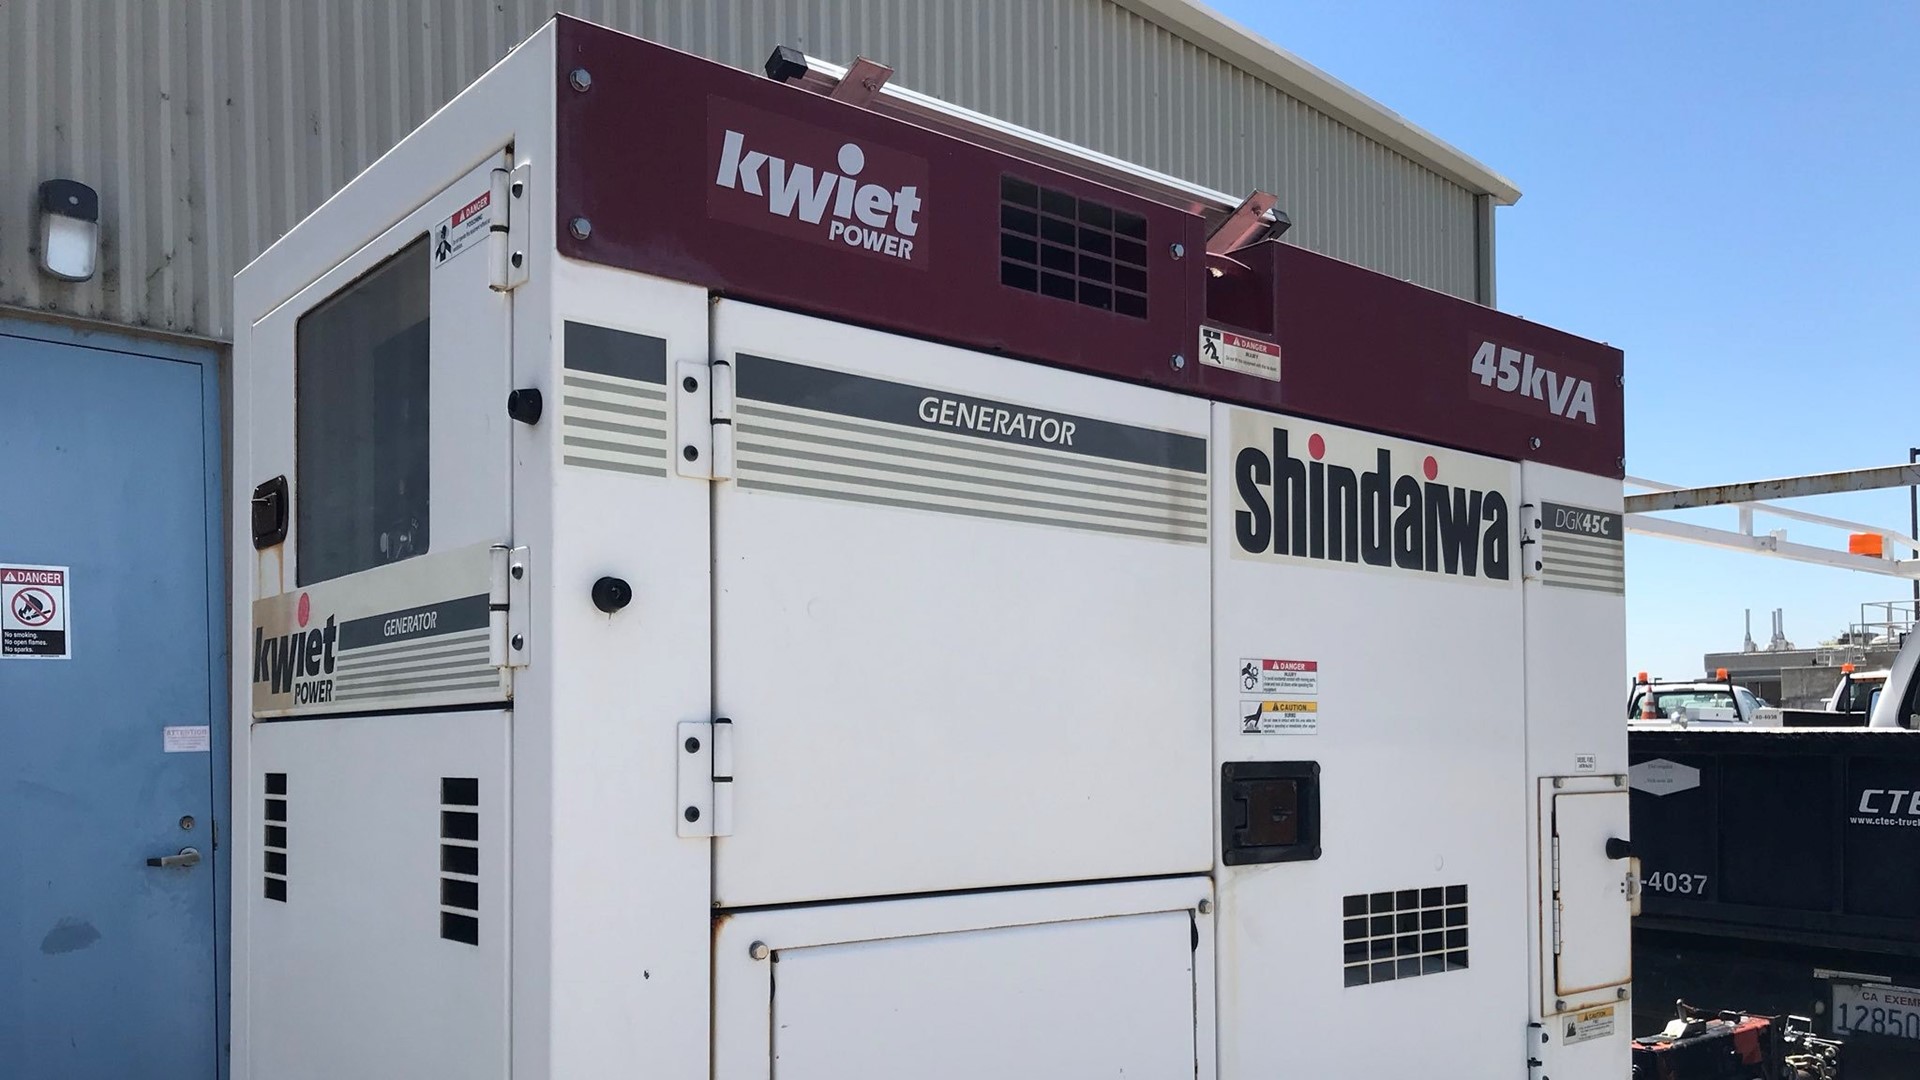 In anticipation of possible PG&E power shutoffs, the city of Manteca is setting aside $80,000 to buy more portable backup generators. The city says these will keep the city's essential services, like sewage, running as usual.